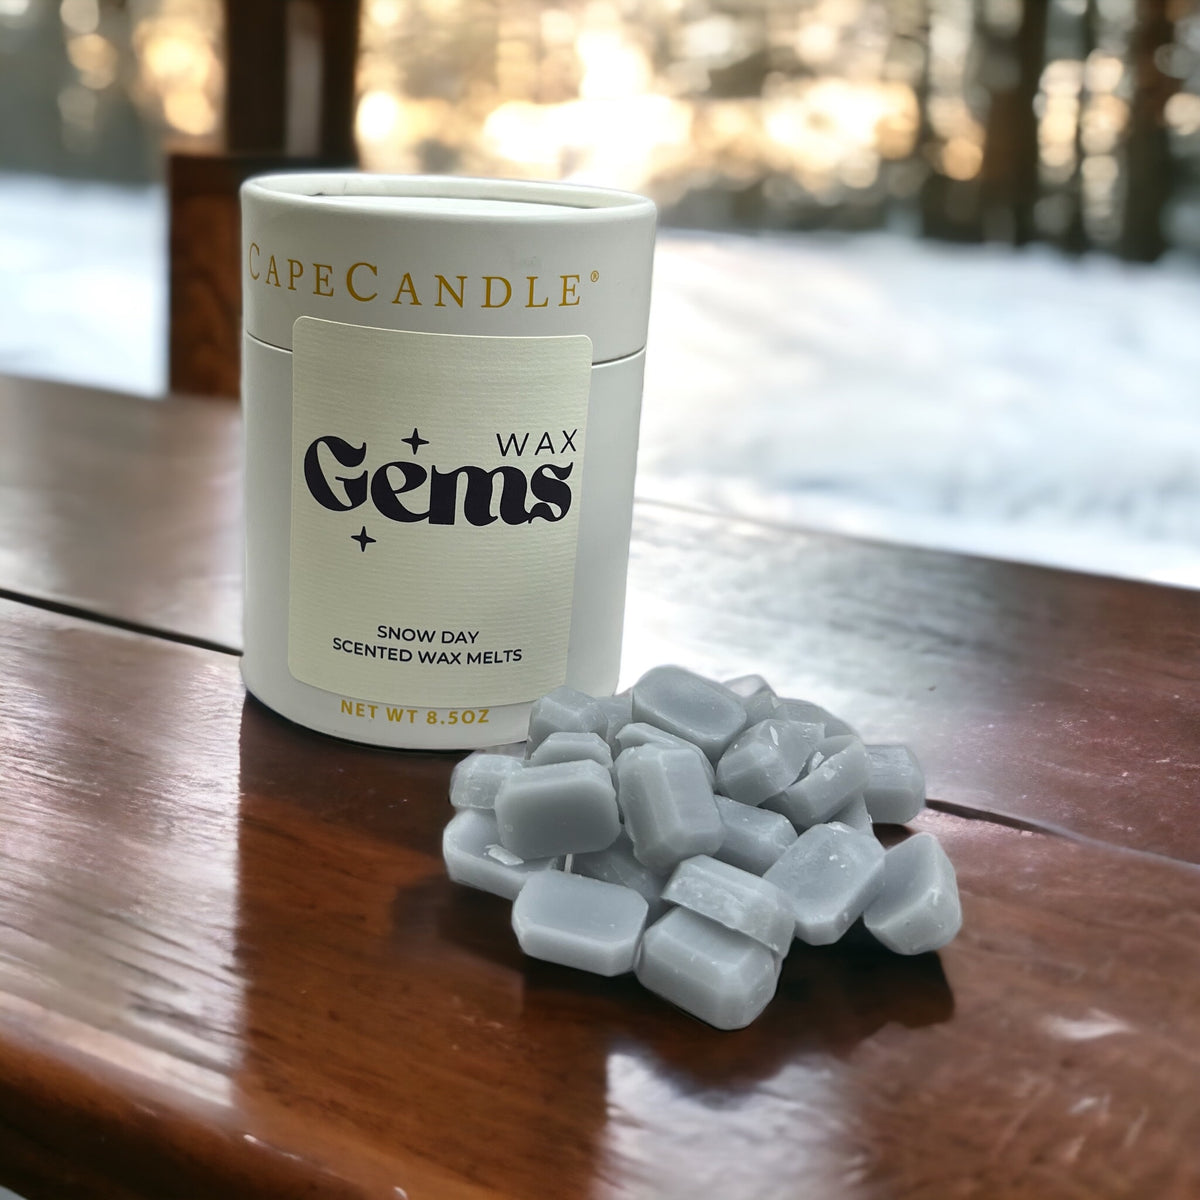 Snow Day 8.5oz Wax Gems by Cape Candle